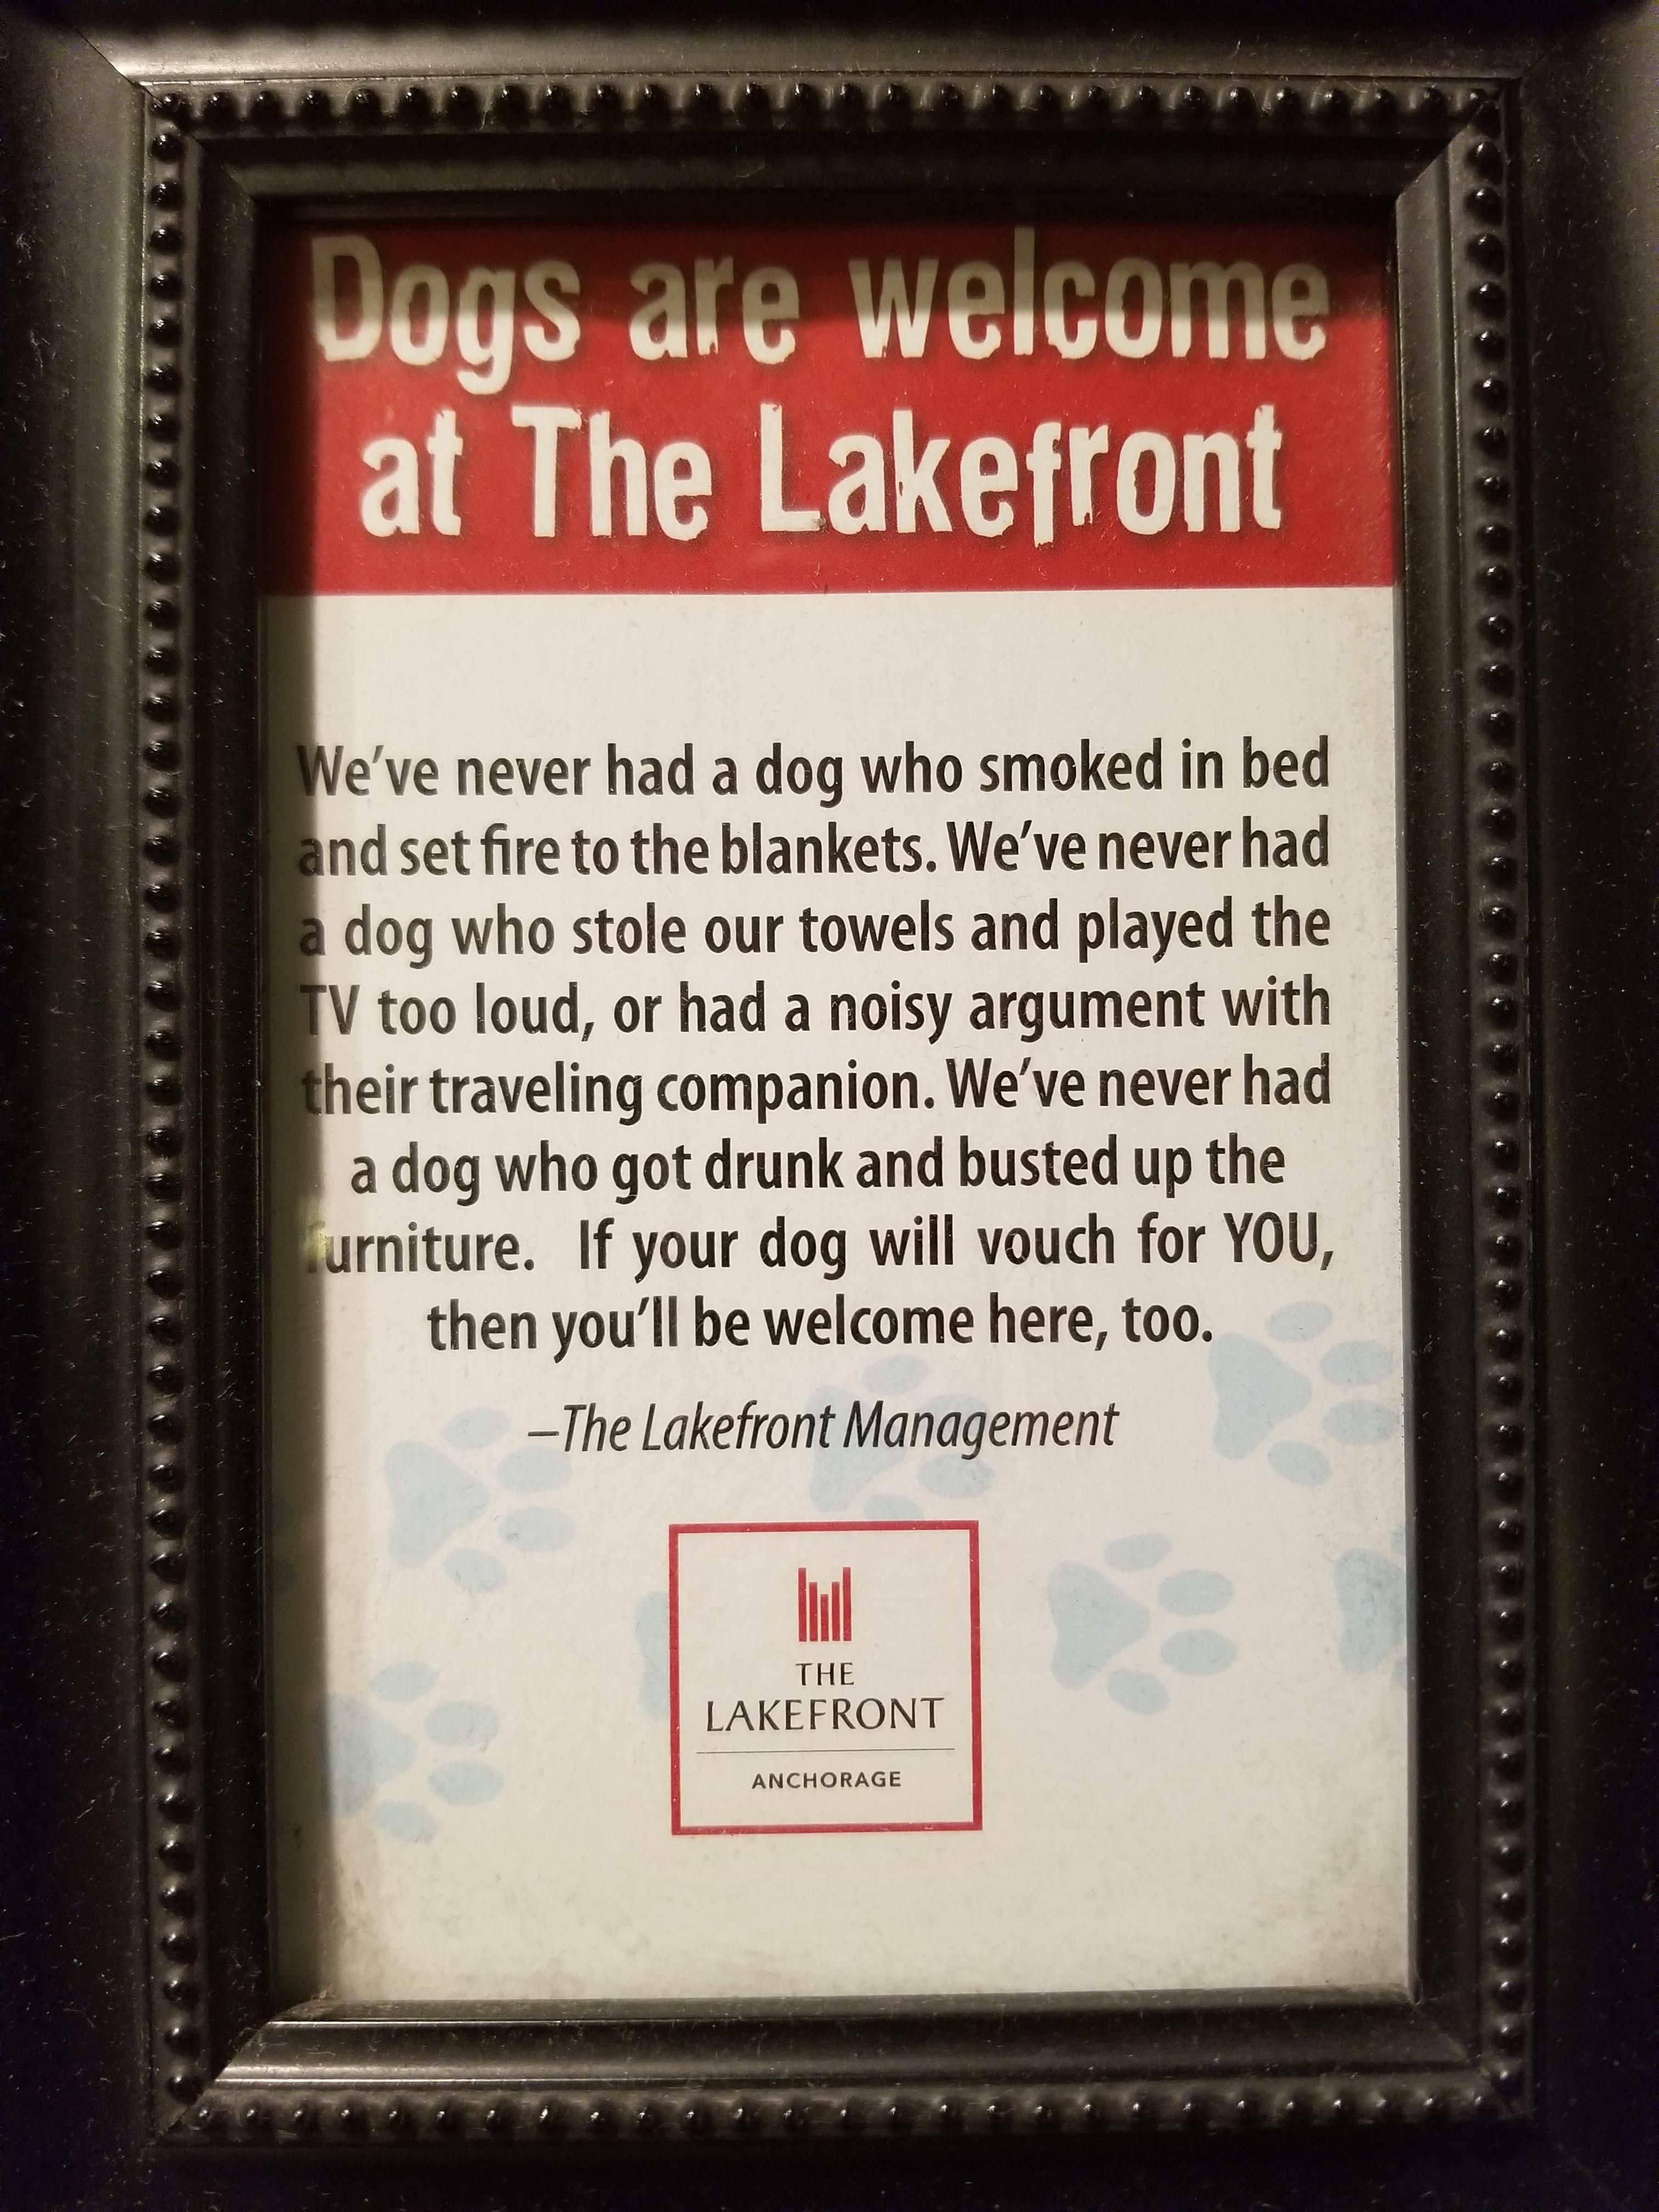 "If your dog will vouch for you..." -a very wholesome sign from a hotel I just stayed the night at.